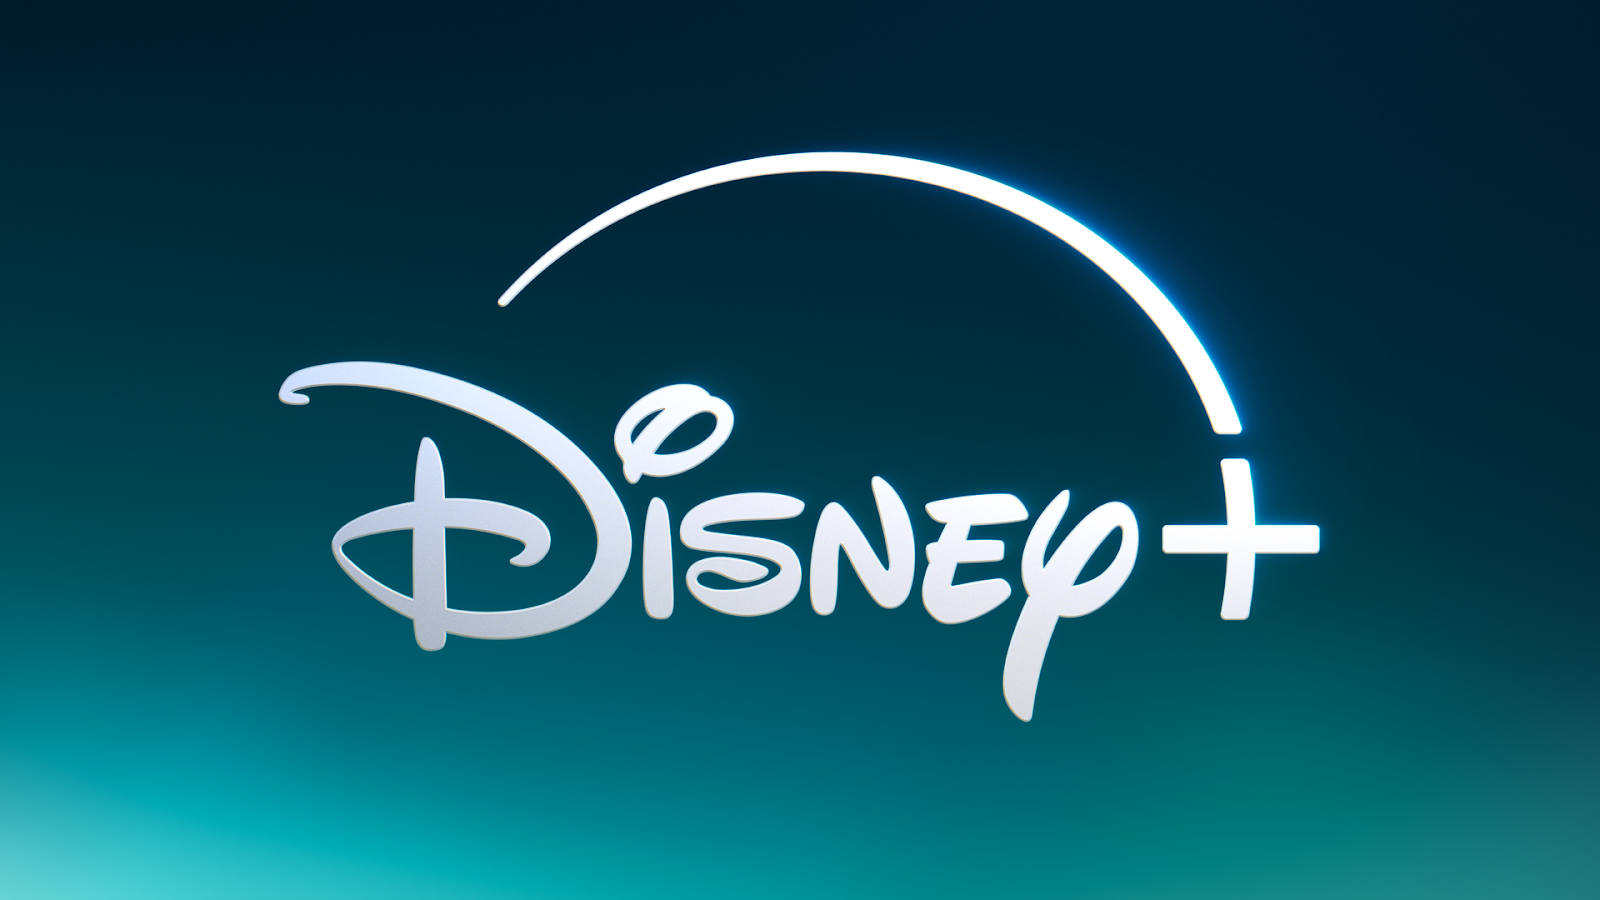 Disney+ Set to Score Big Adding Live ESPN Games and Shows in 2024